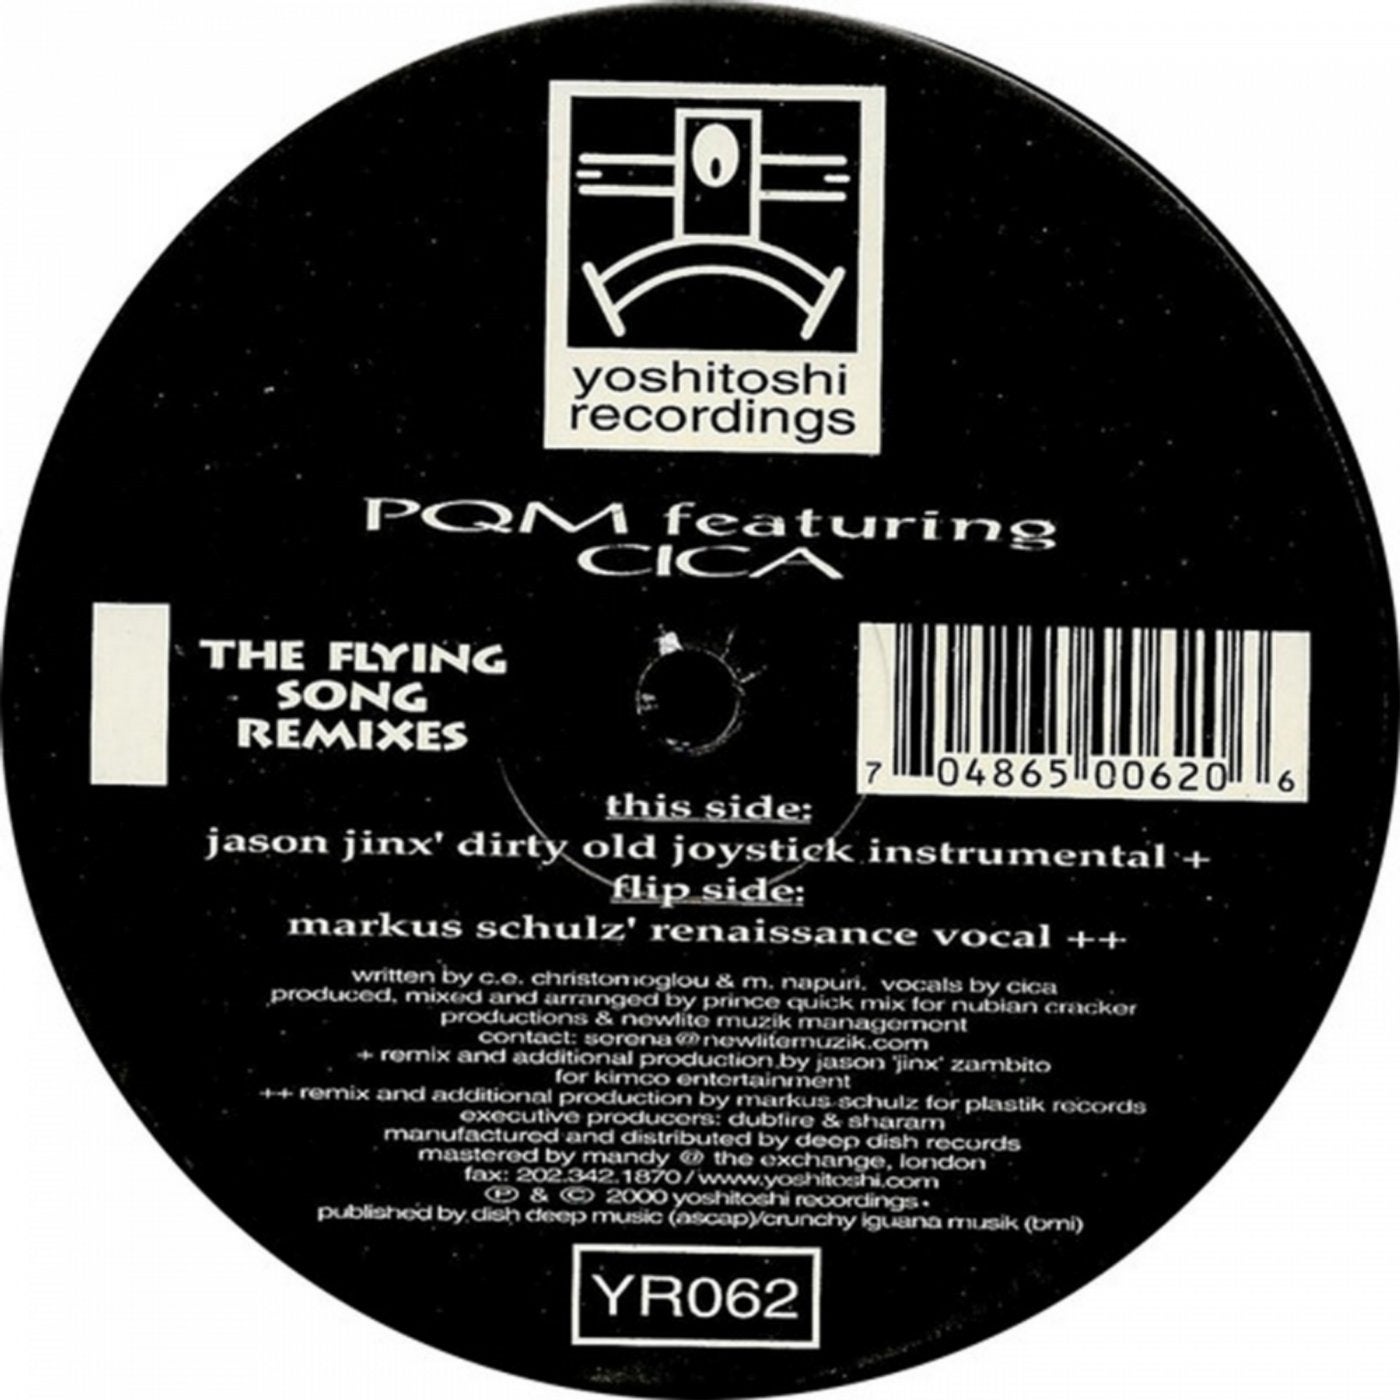 The Flying Song (Remixes)